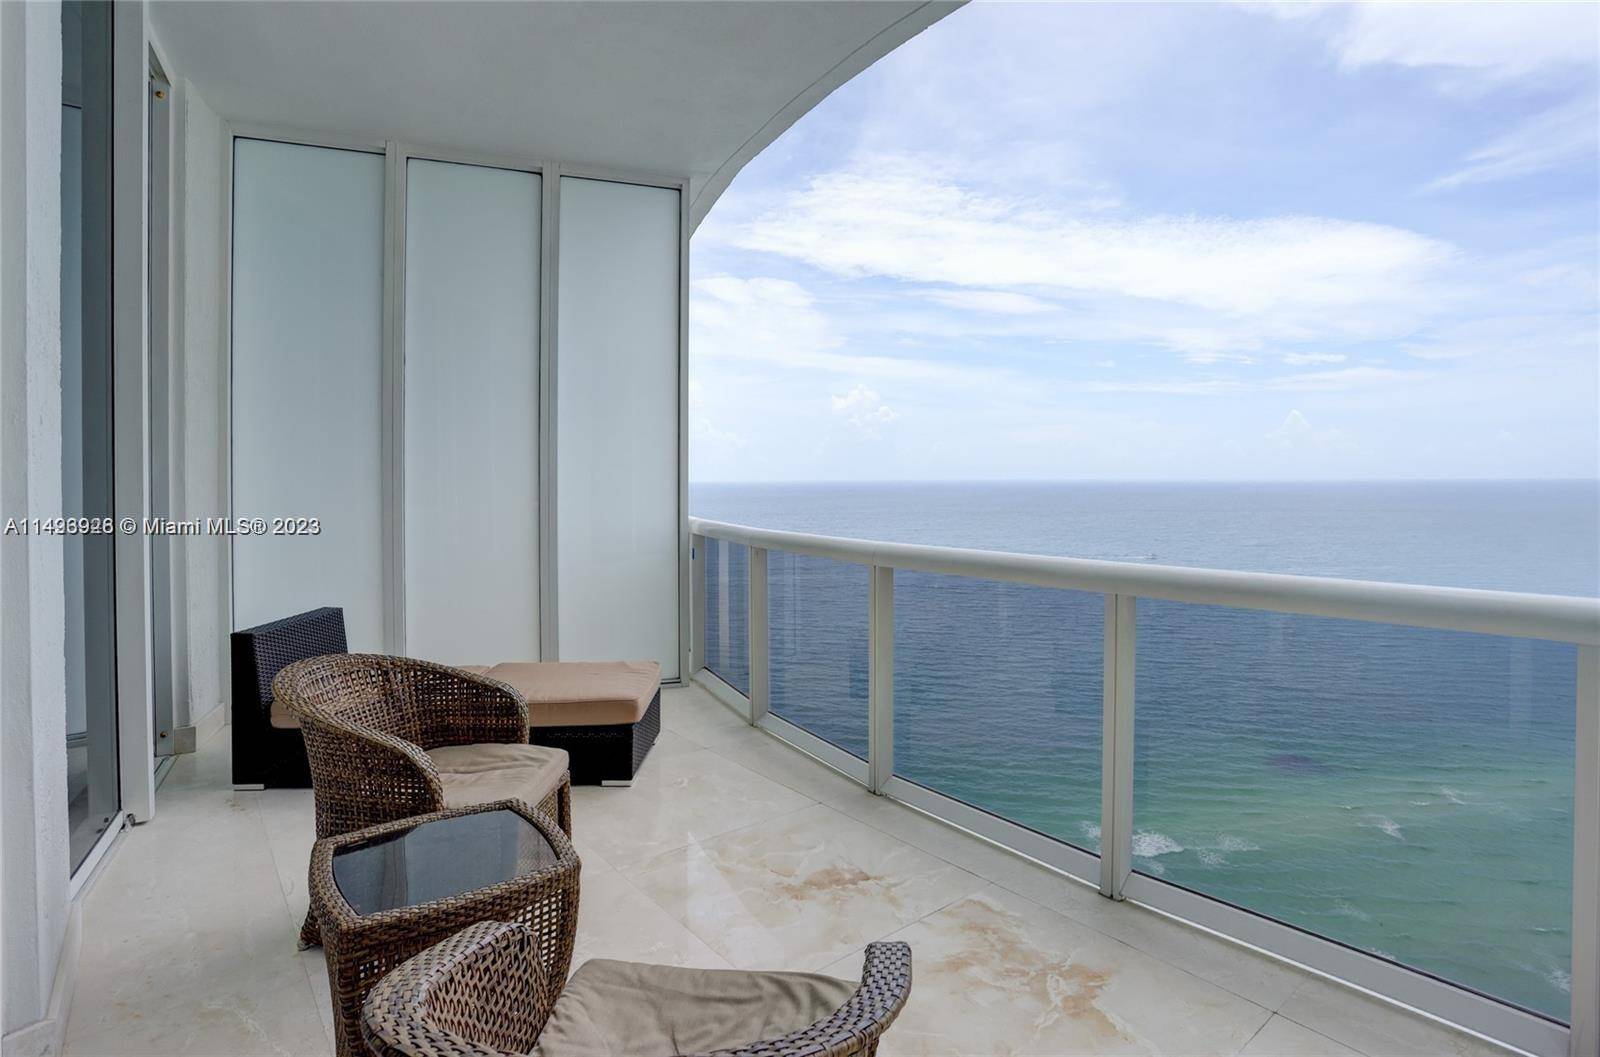 Oceanfront Furnished YEARLY RENTAL Unit has 11 Feet Ceiling with extended terrace with panoramic Ocean and Intracoastal Views.